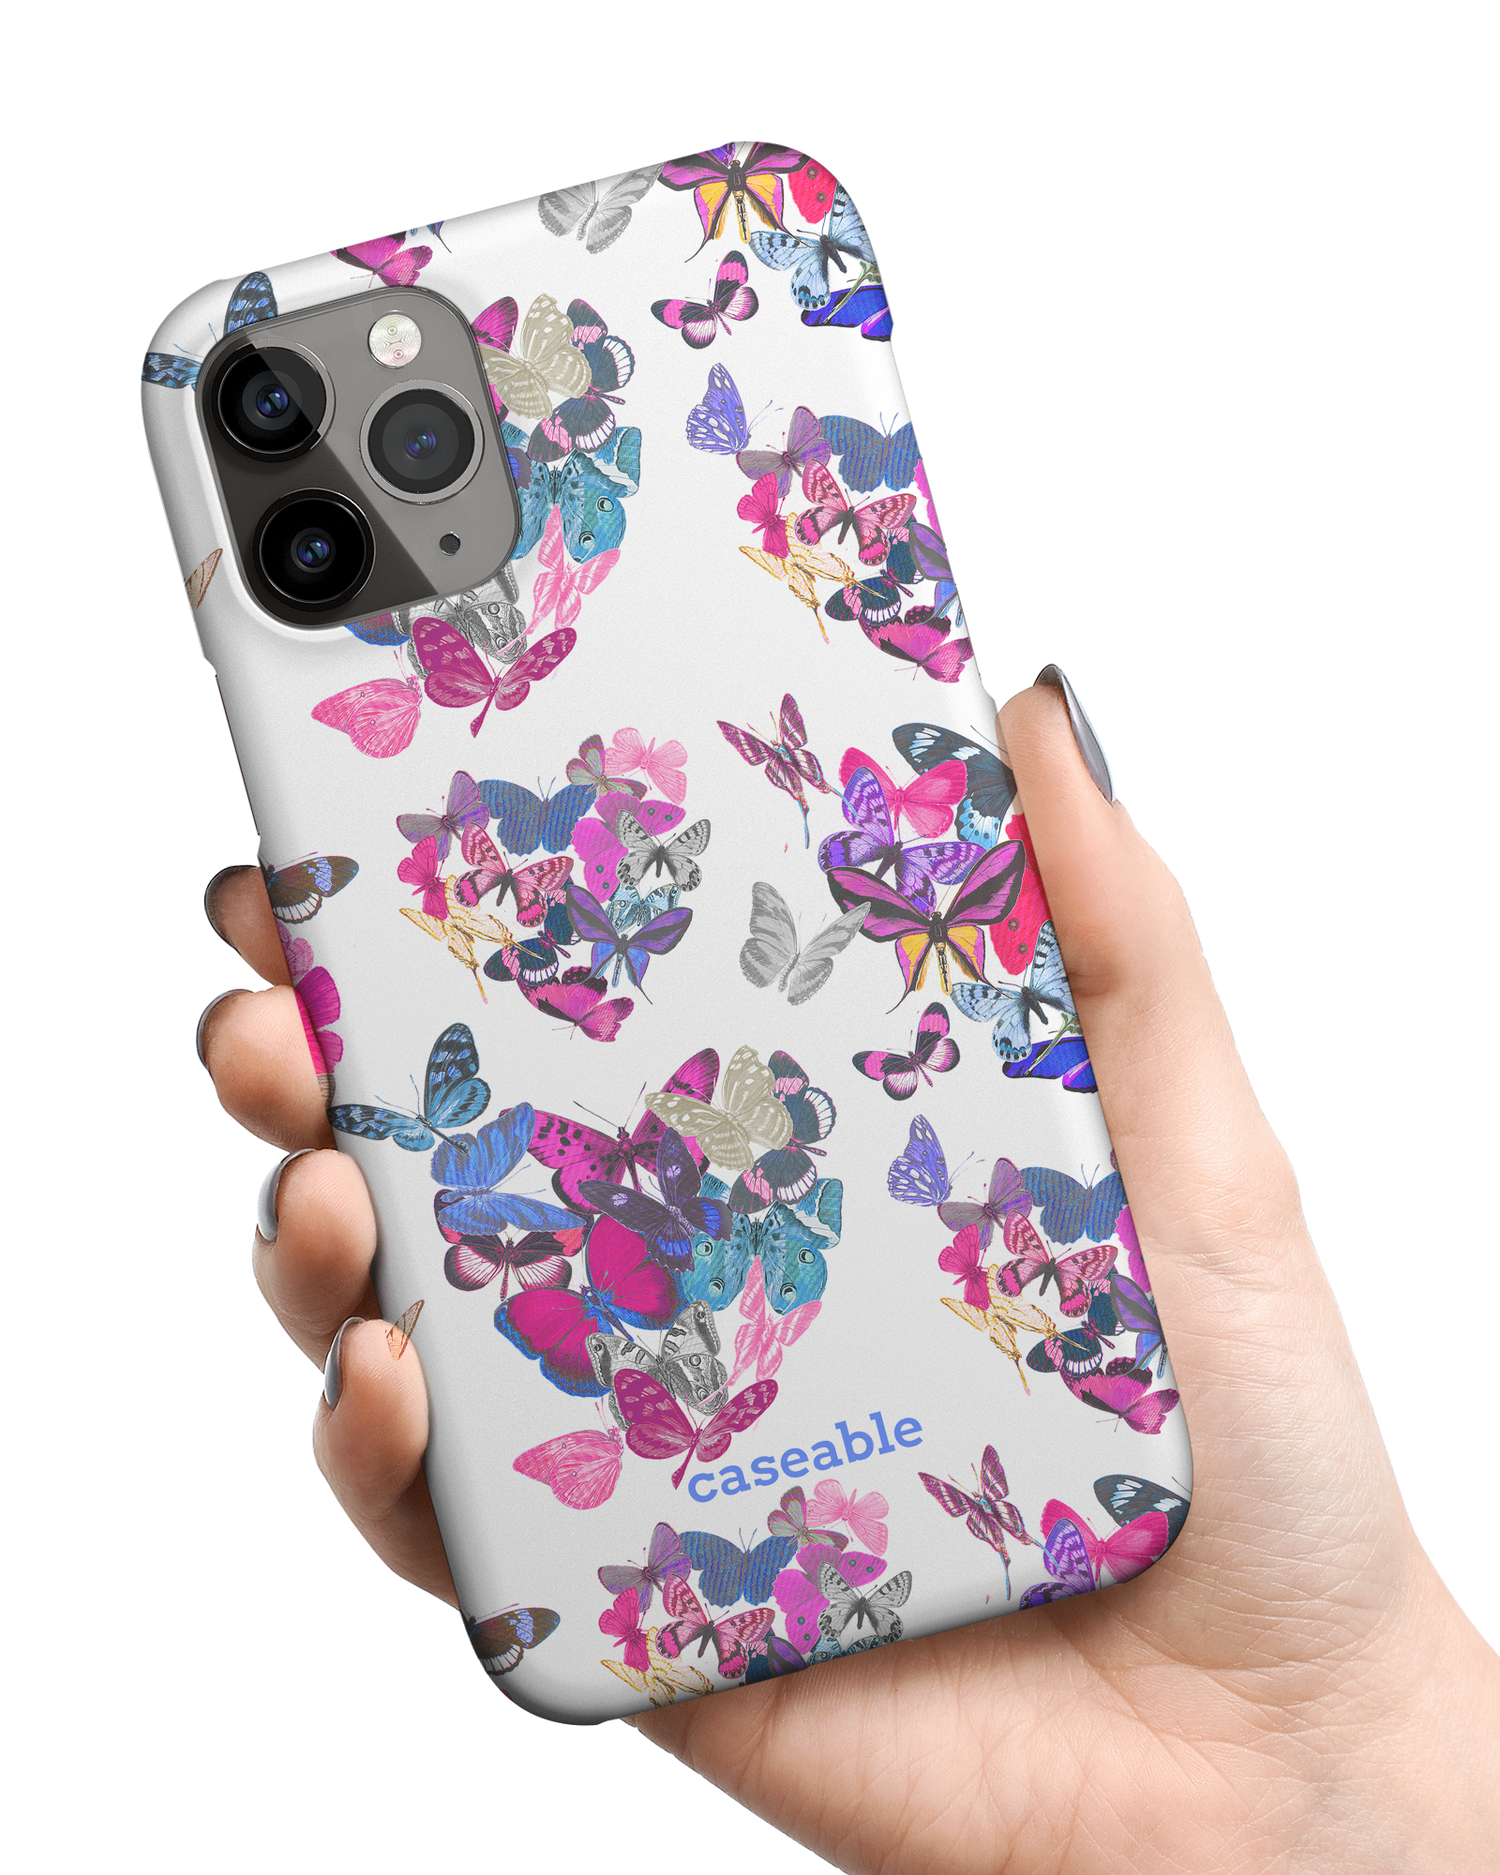 Butterfly Love Hard Shell Phone Case Apple iPhone 11 Pro Max held in hand